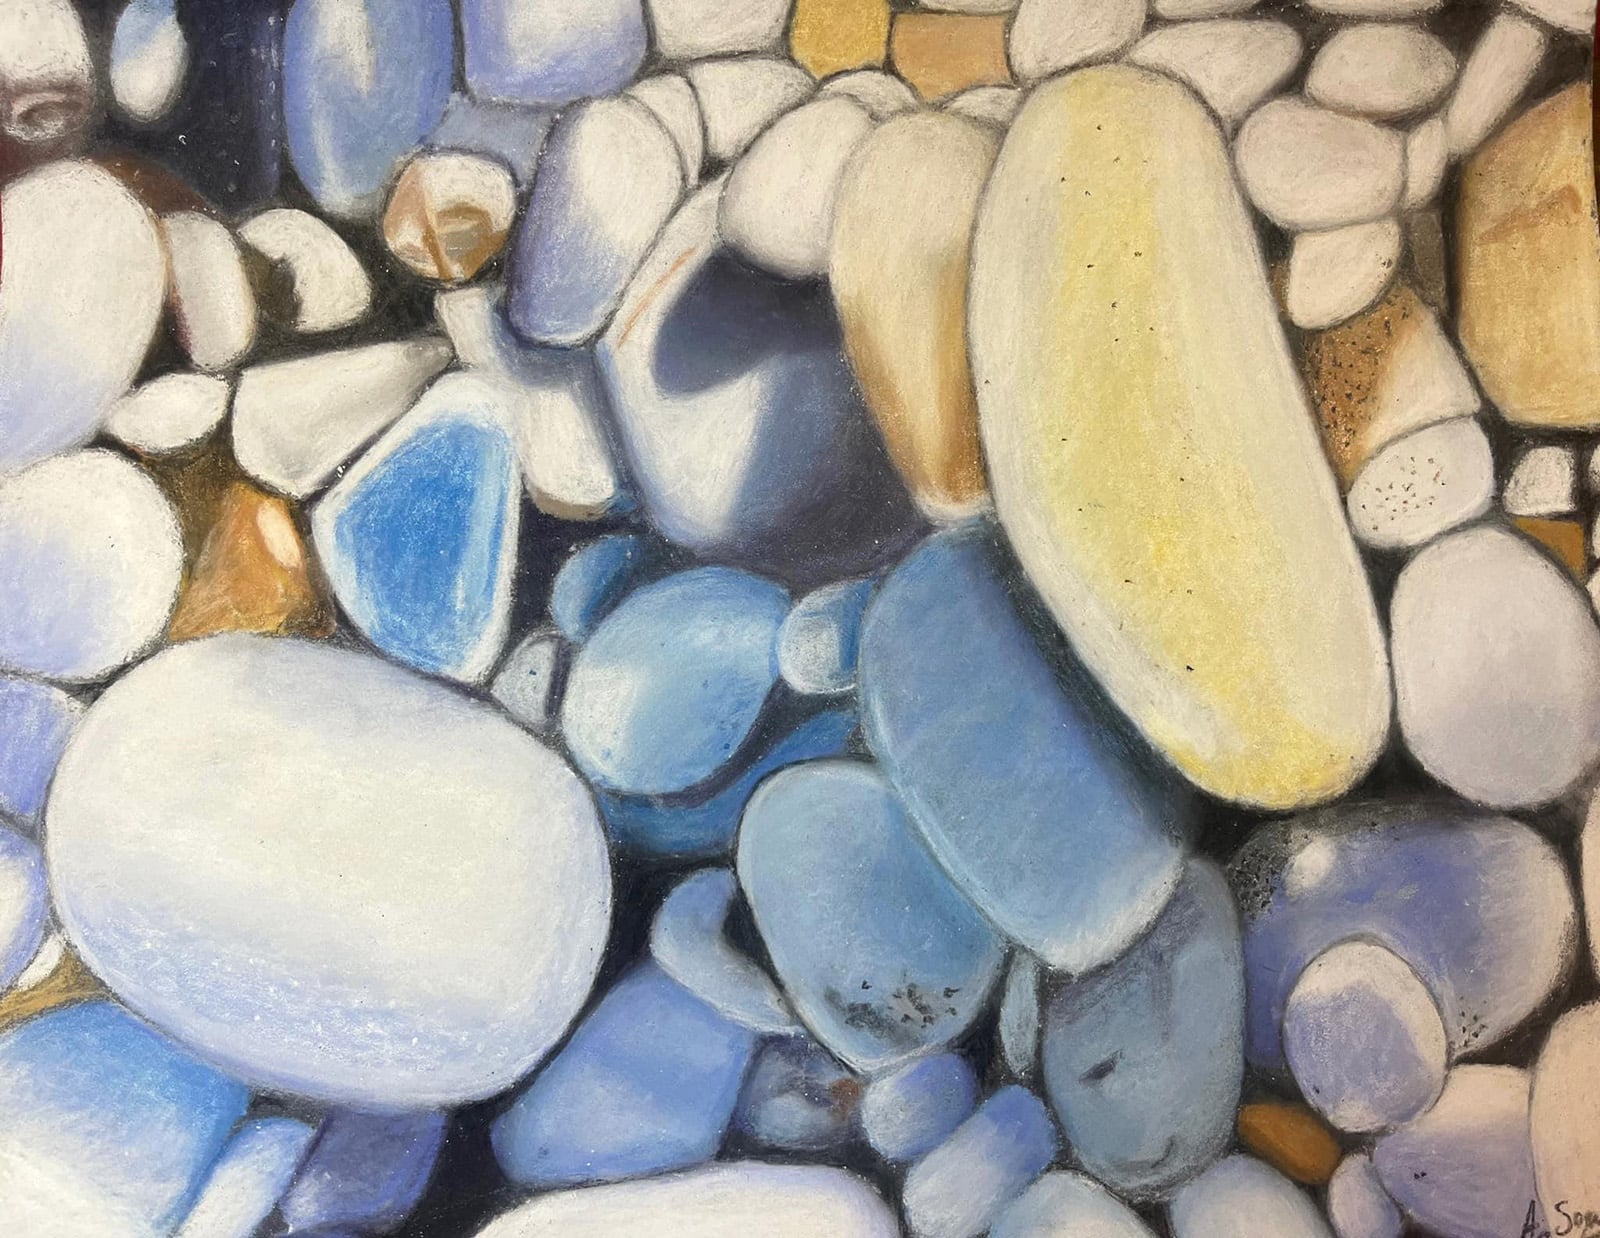 "Paradise Beach" Pastel Painting with Pastel Pencils and Soft Pastels on Sanded Pastel Paper by Athina Soultani